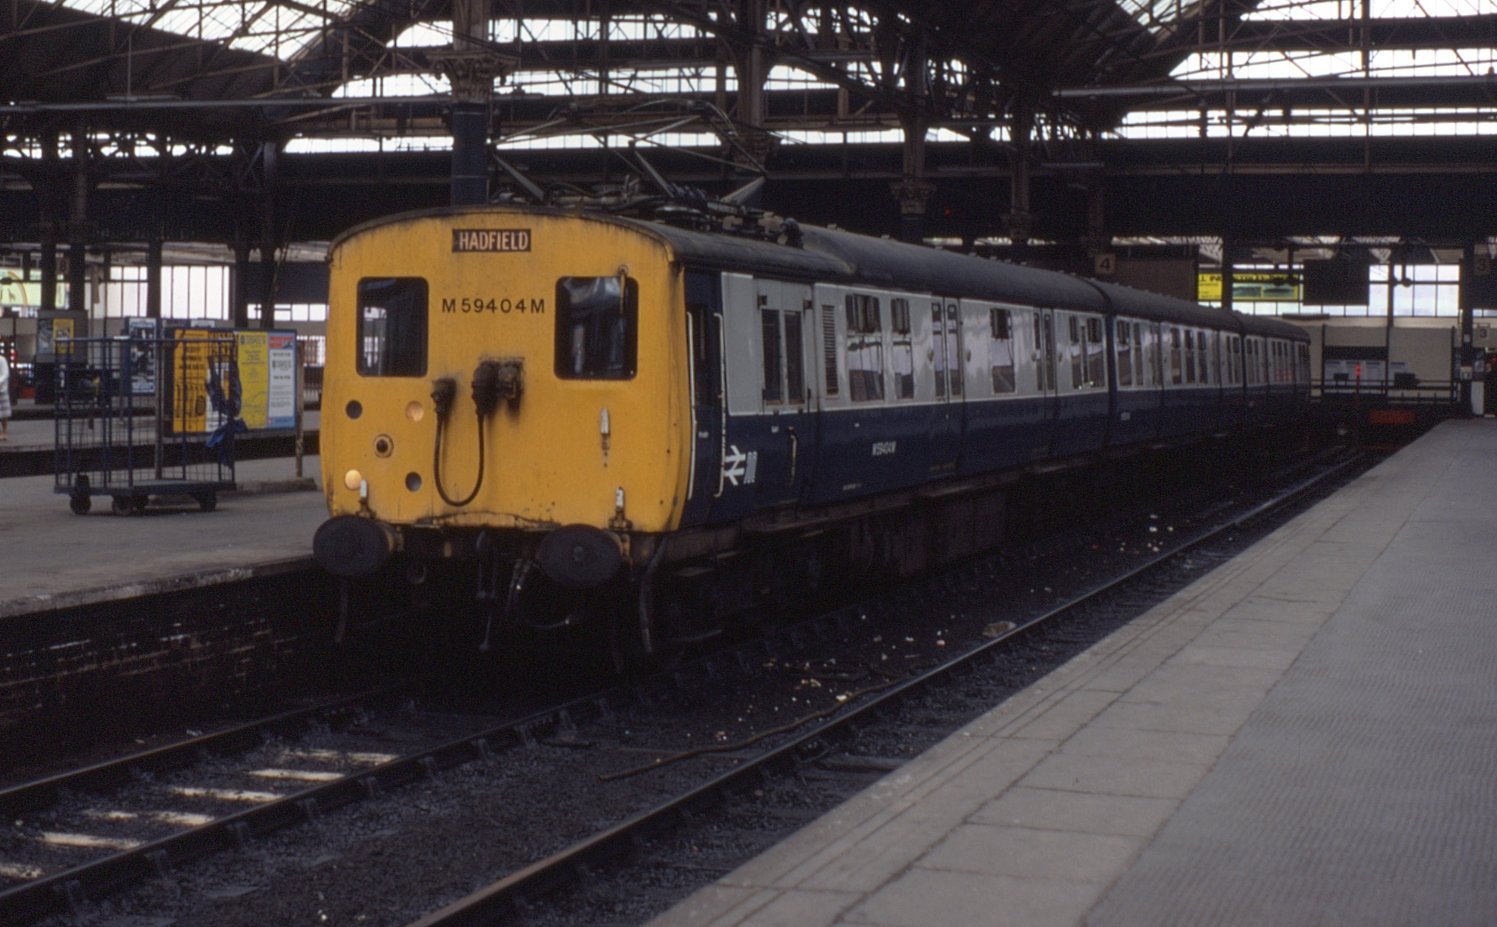 17.07.84_Manchester_Piccadilly_Class_506_%286076993098%29.jpg